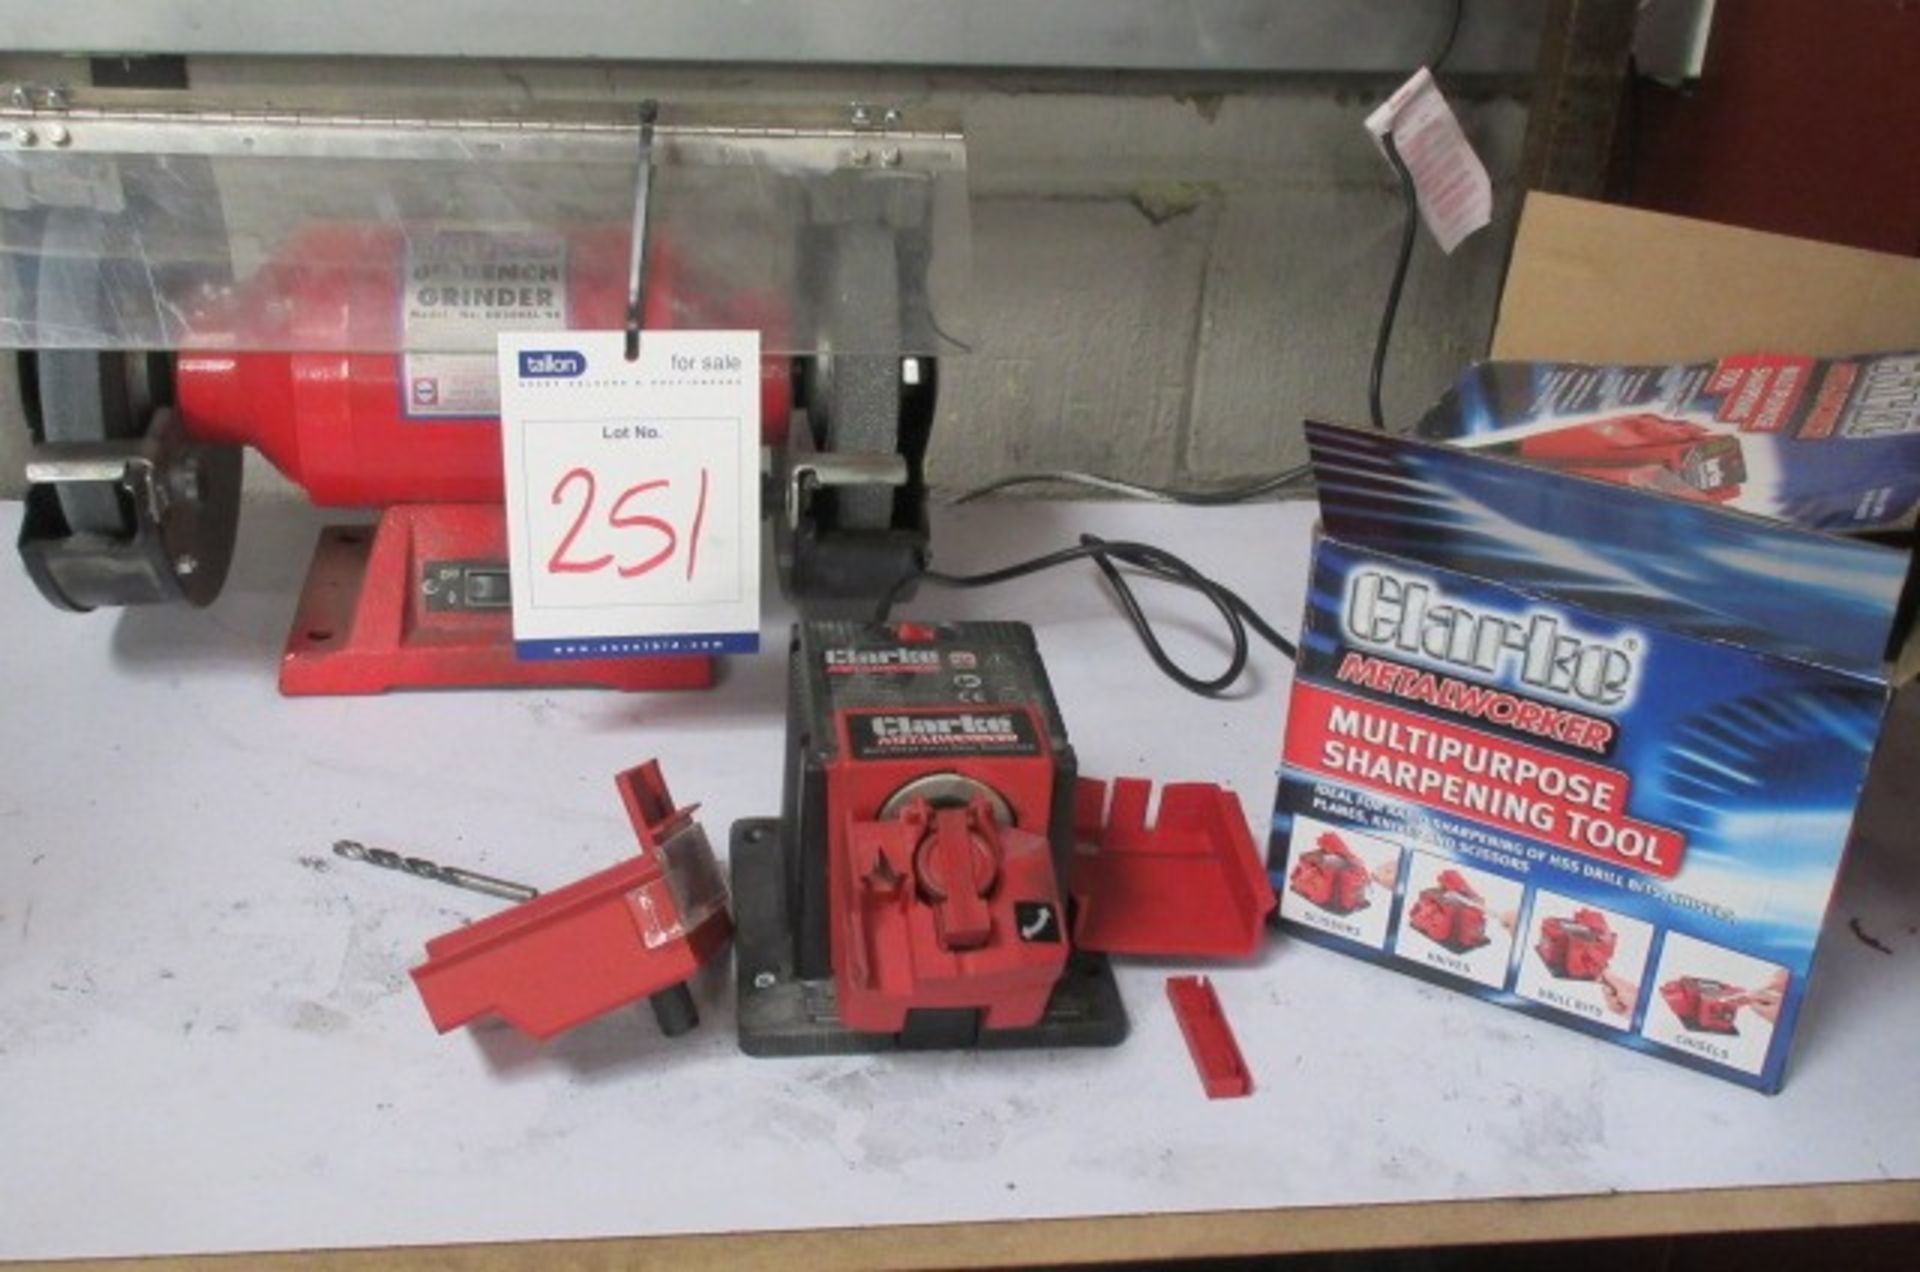 Sealey BG200XL/98 double ended bench grinder